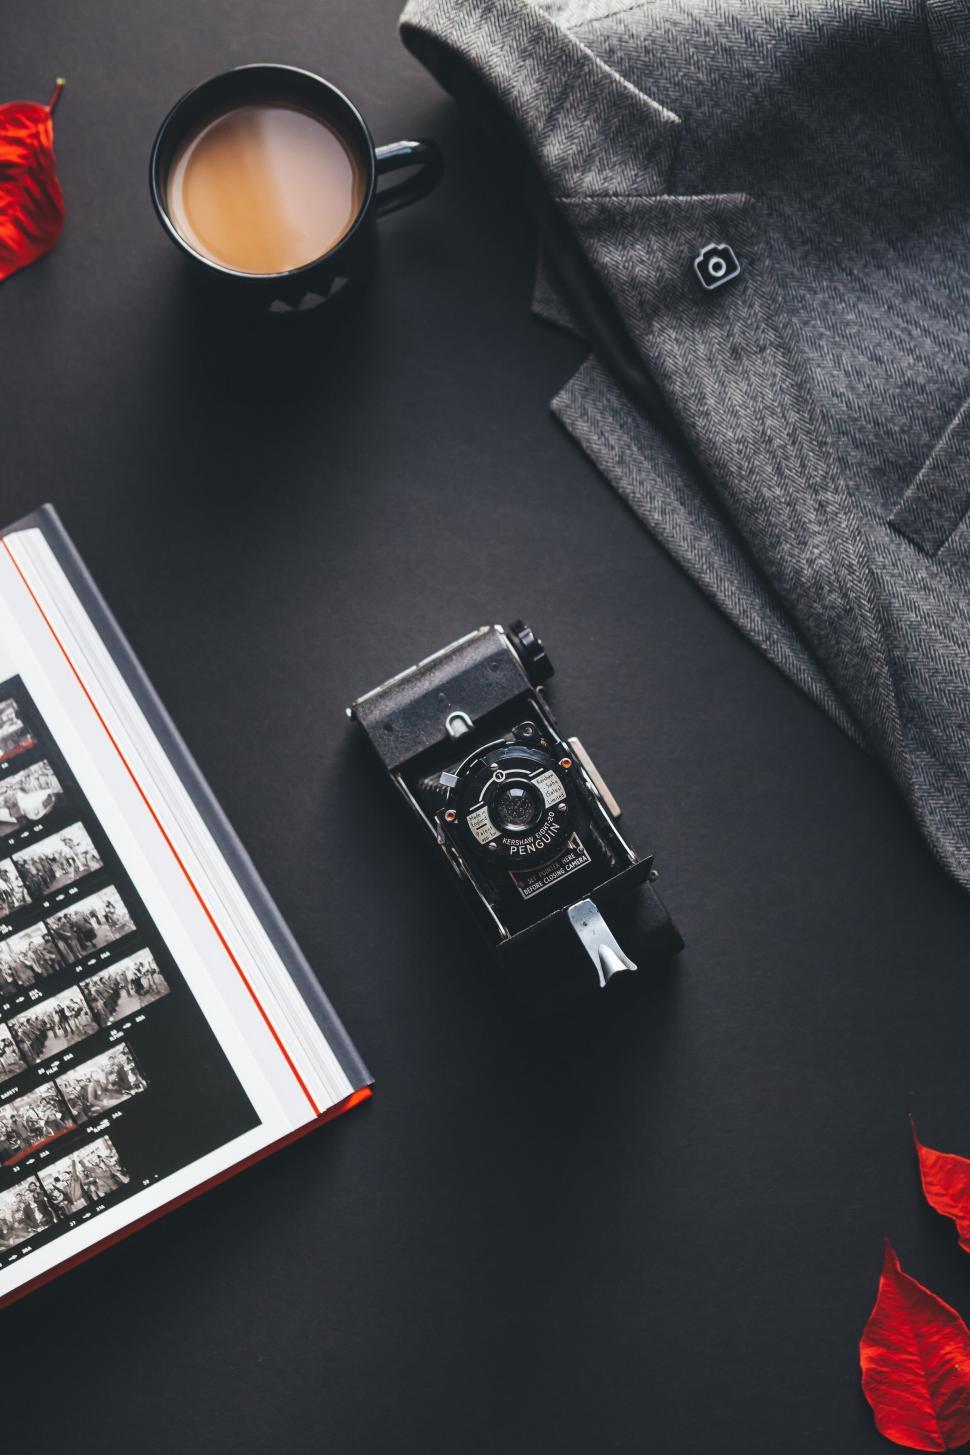 Free Image of Camera and Book on Table 